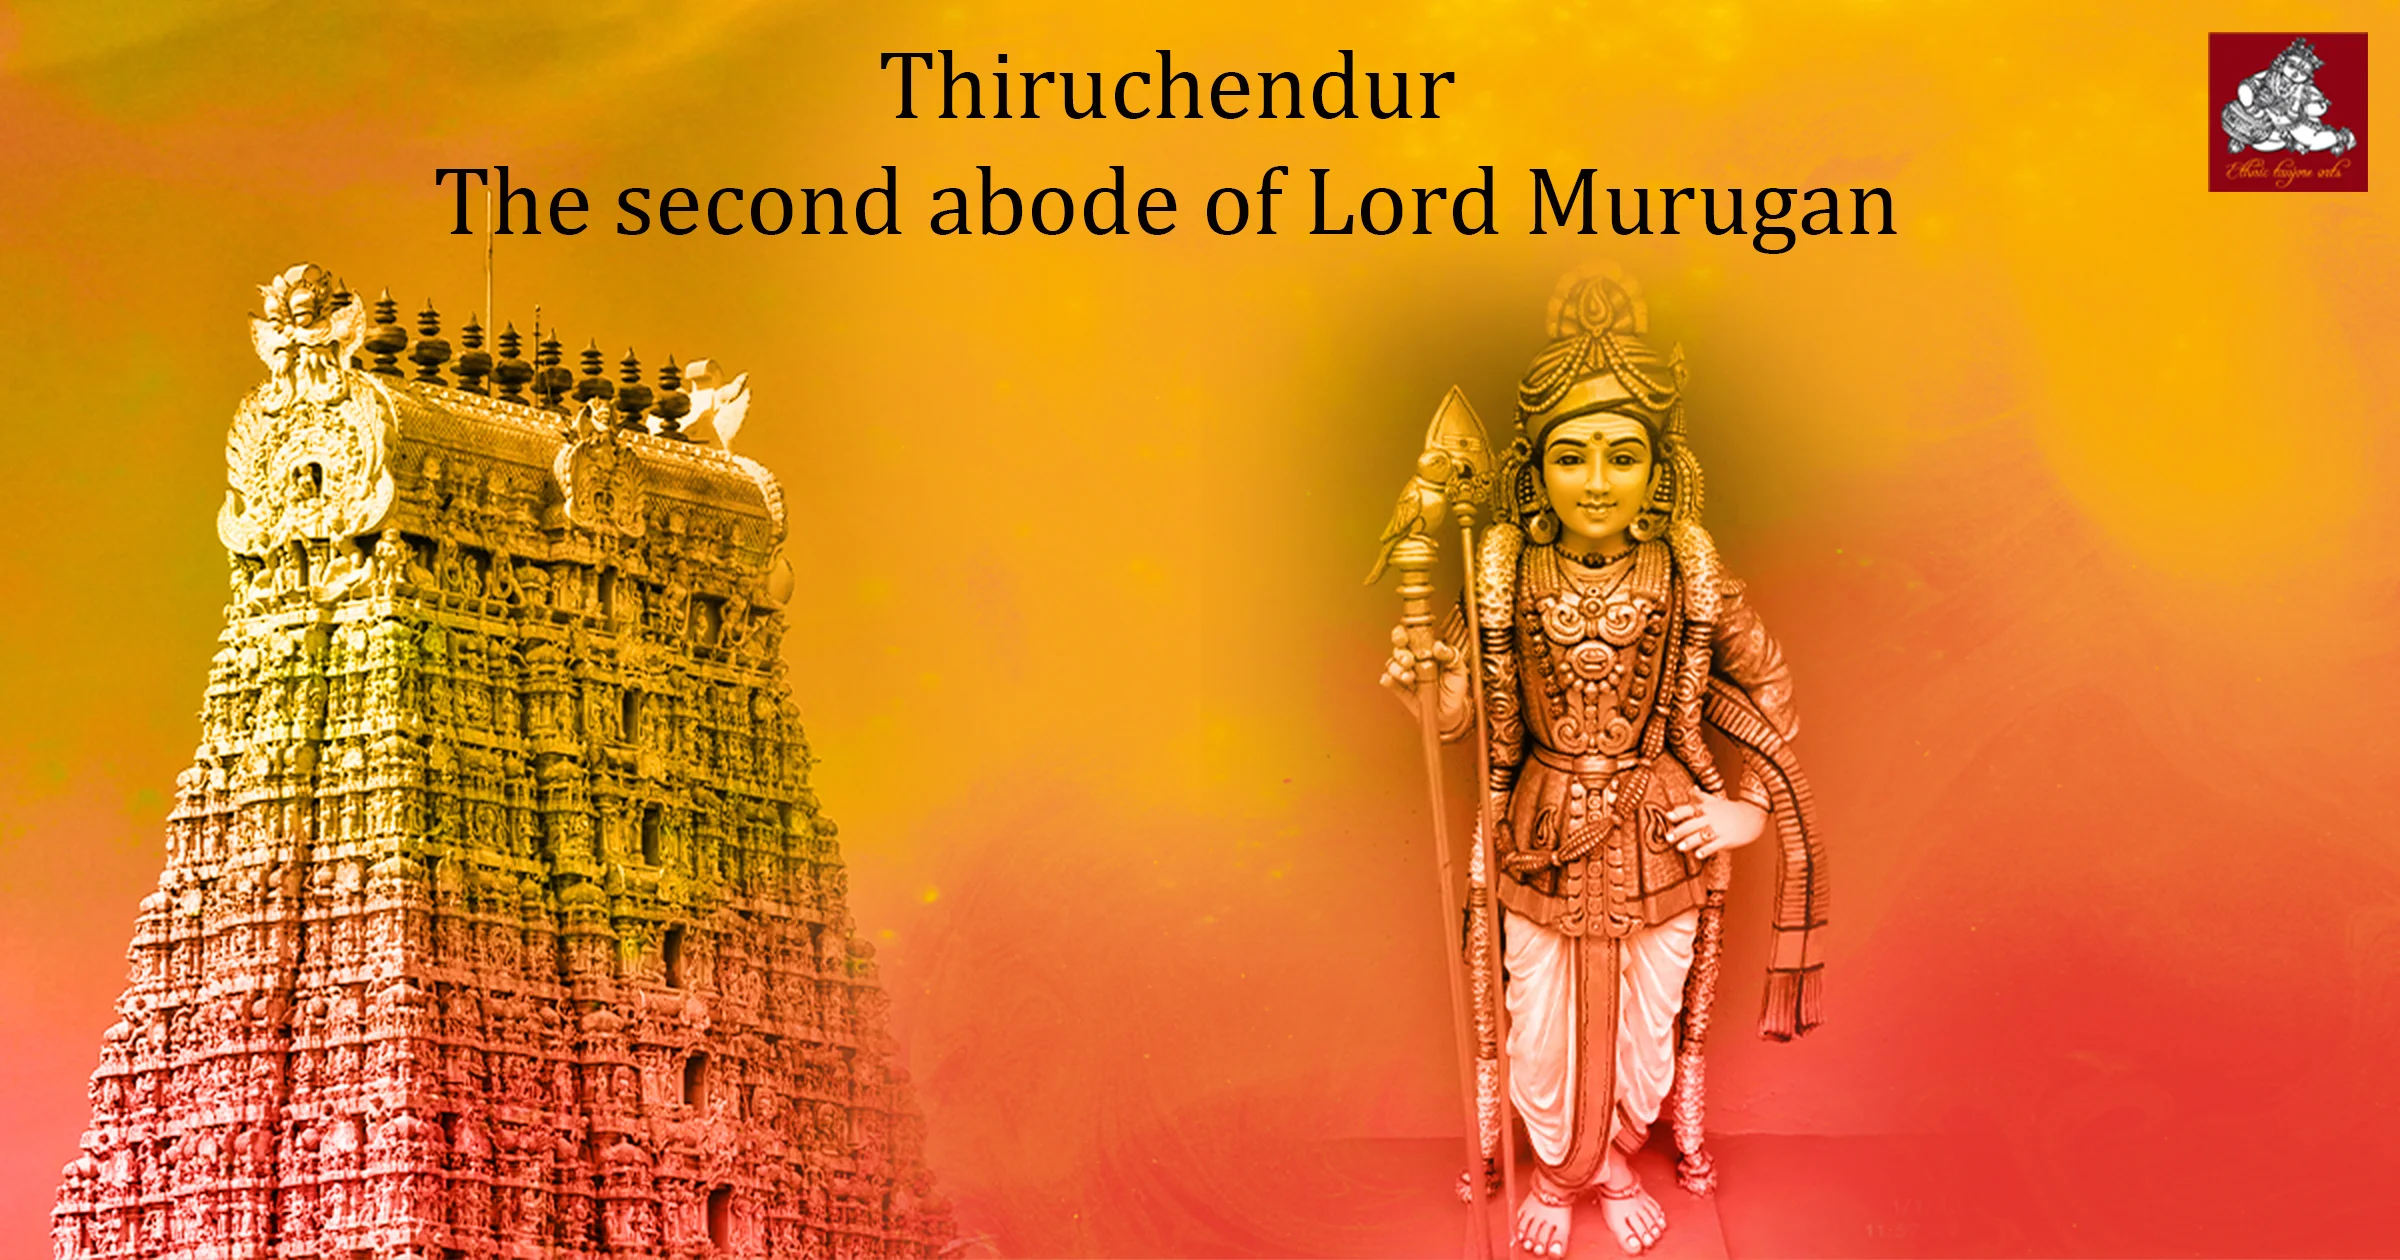 The second abode of Lord Murugan